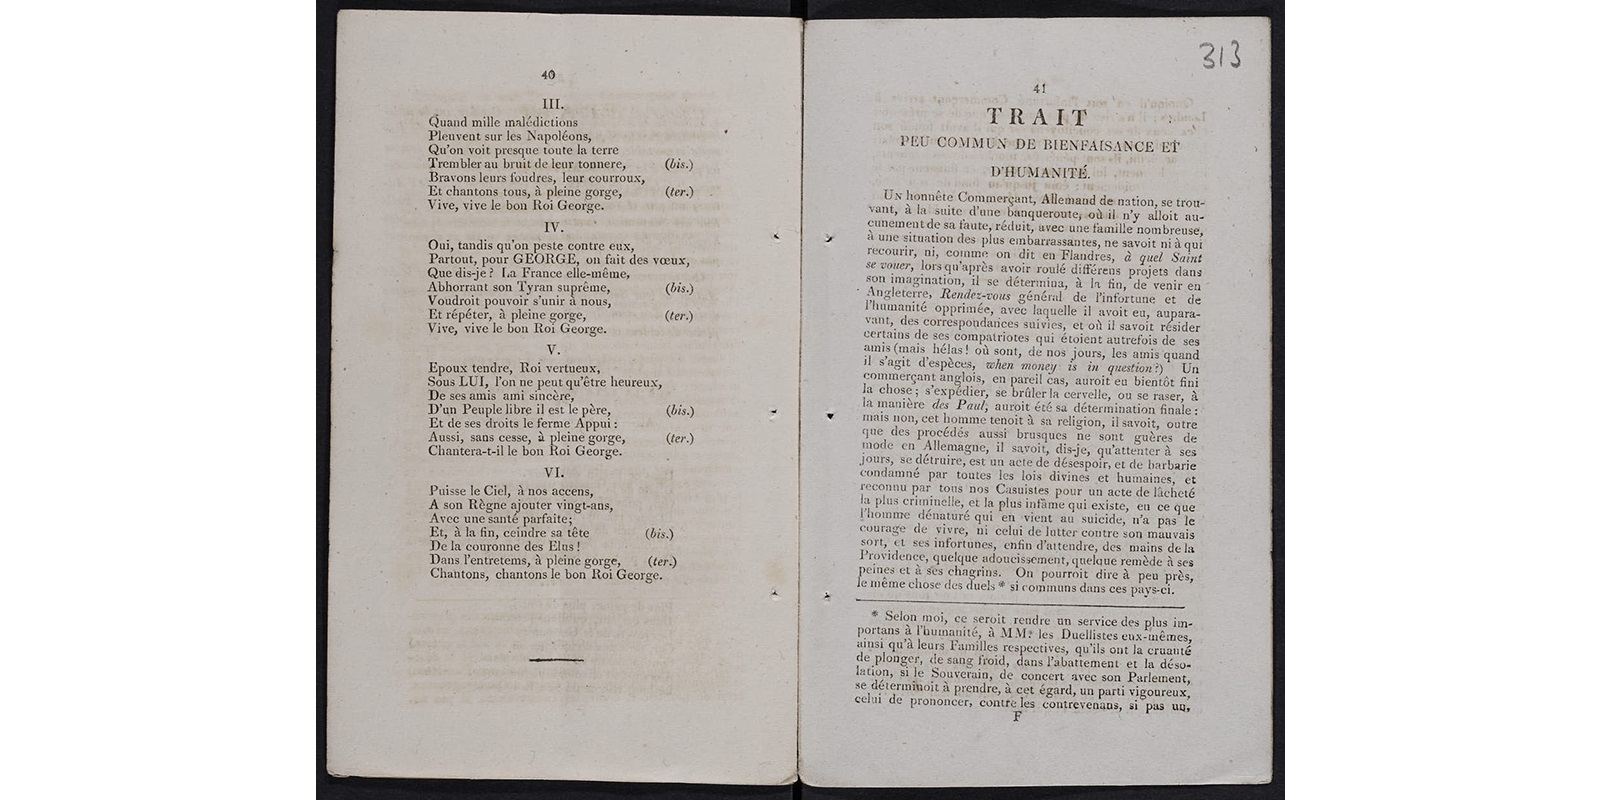 Printed pamphlet, written in French, about George III's Jubilee.